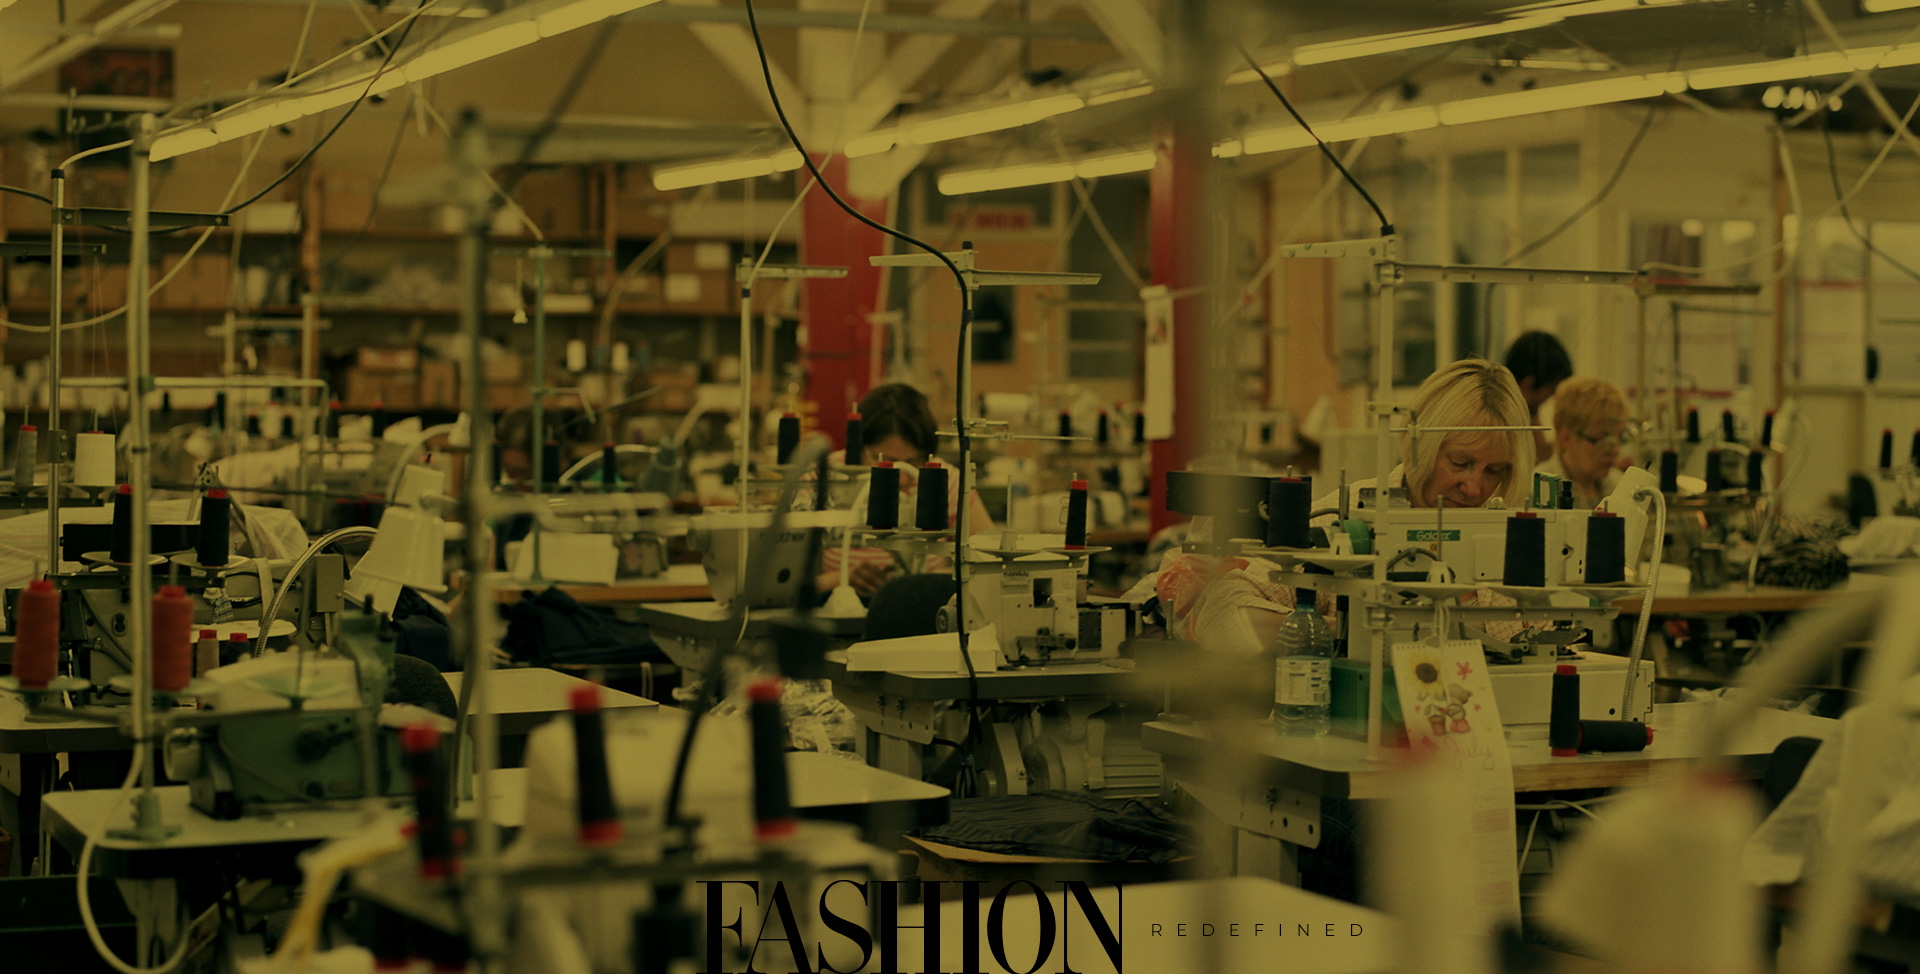 FULL SERVICE CLOTHING DEVELOPMENT AND MANUFACTURING